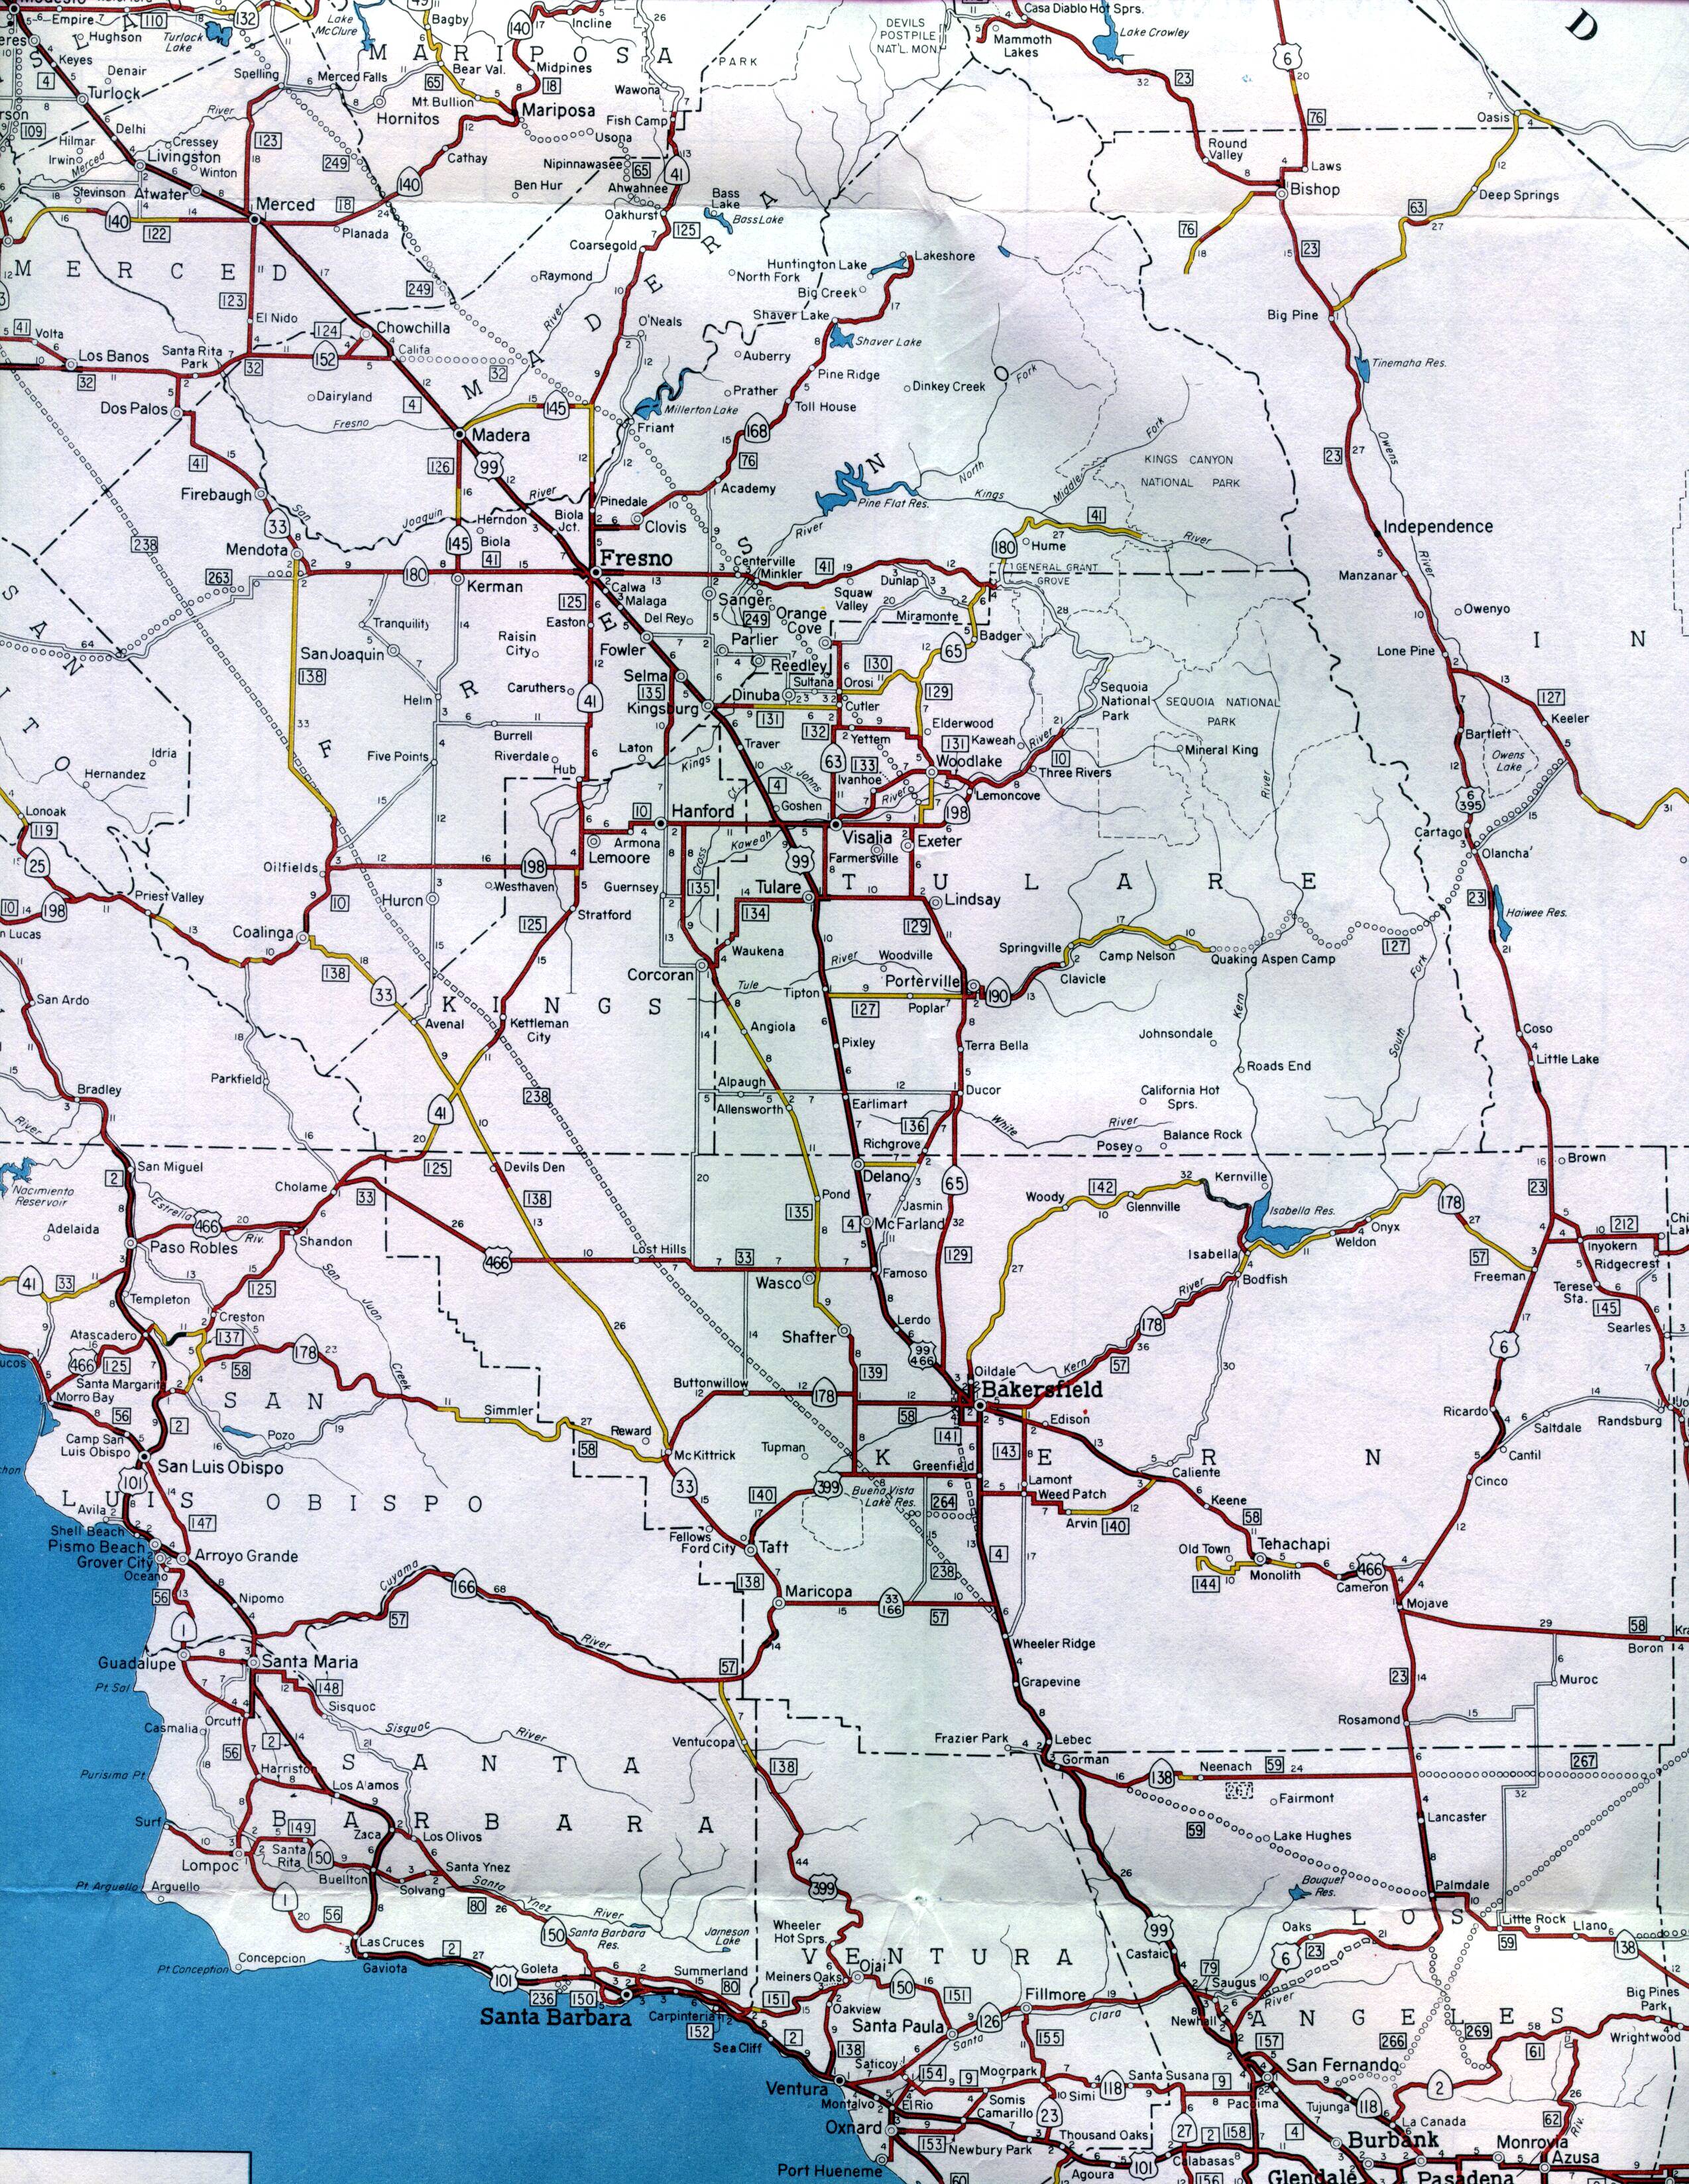 Central Valley of California (1961 official map)